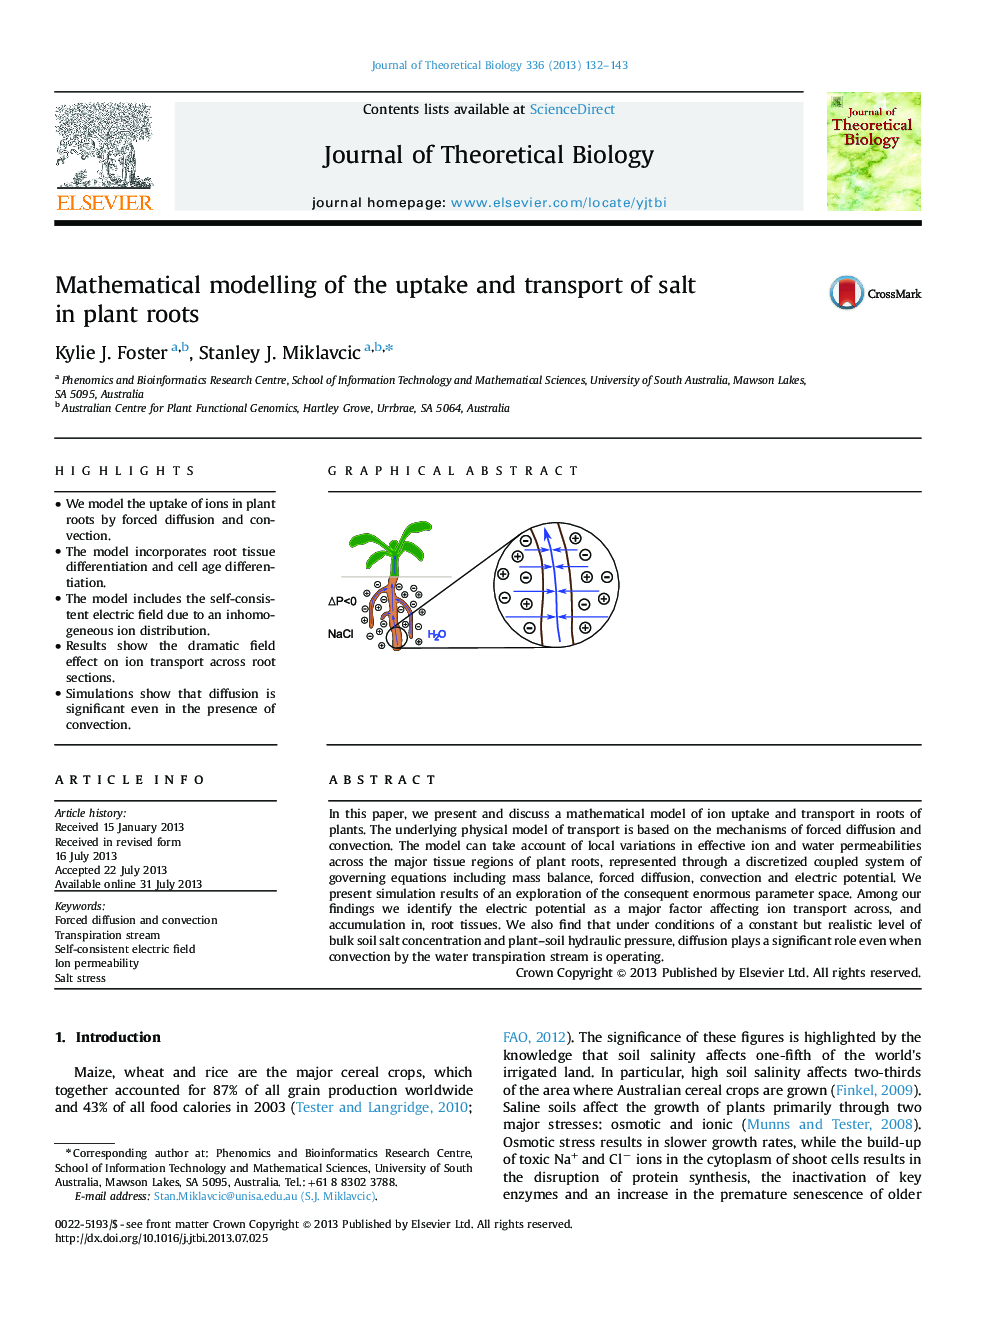 Mathematical modelling of the uptake and transport of salt in plant roots